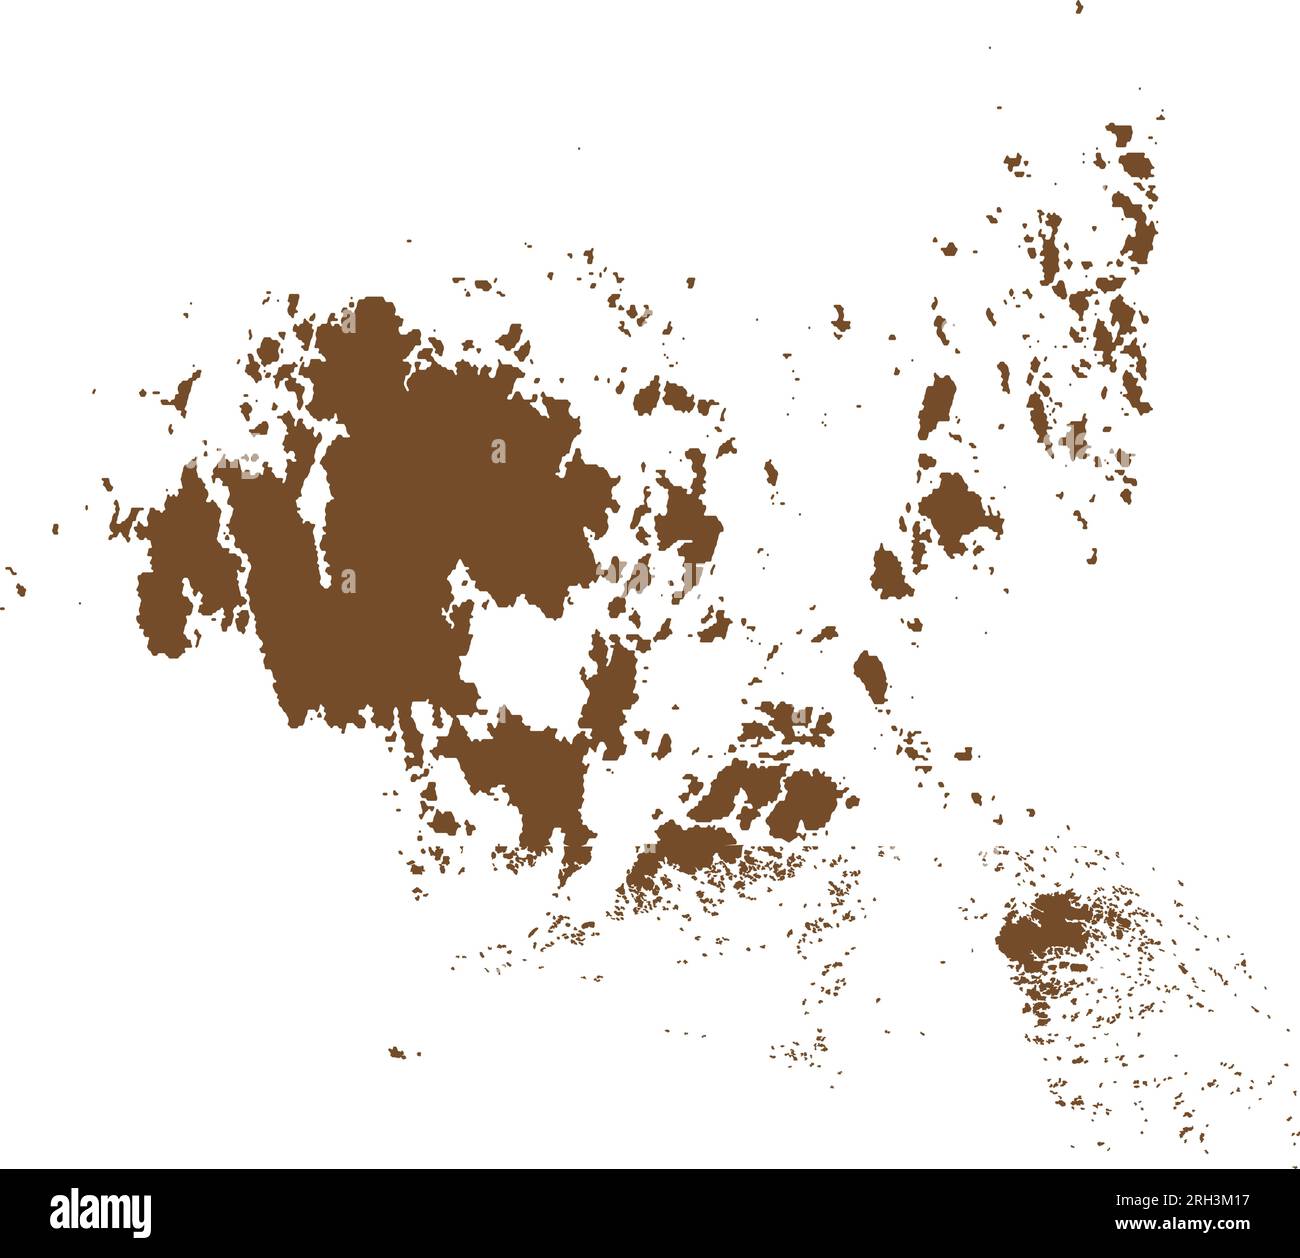 BROWN CMYK color map of ALAND ISLANDS, FINLAND Stock Vector